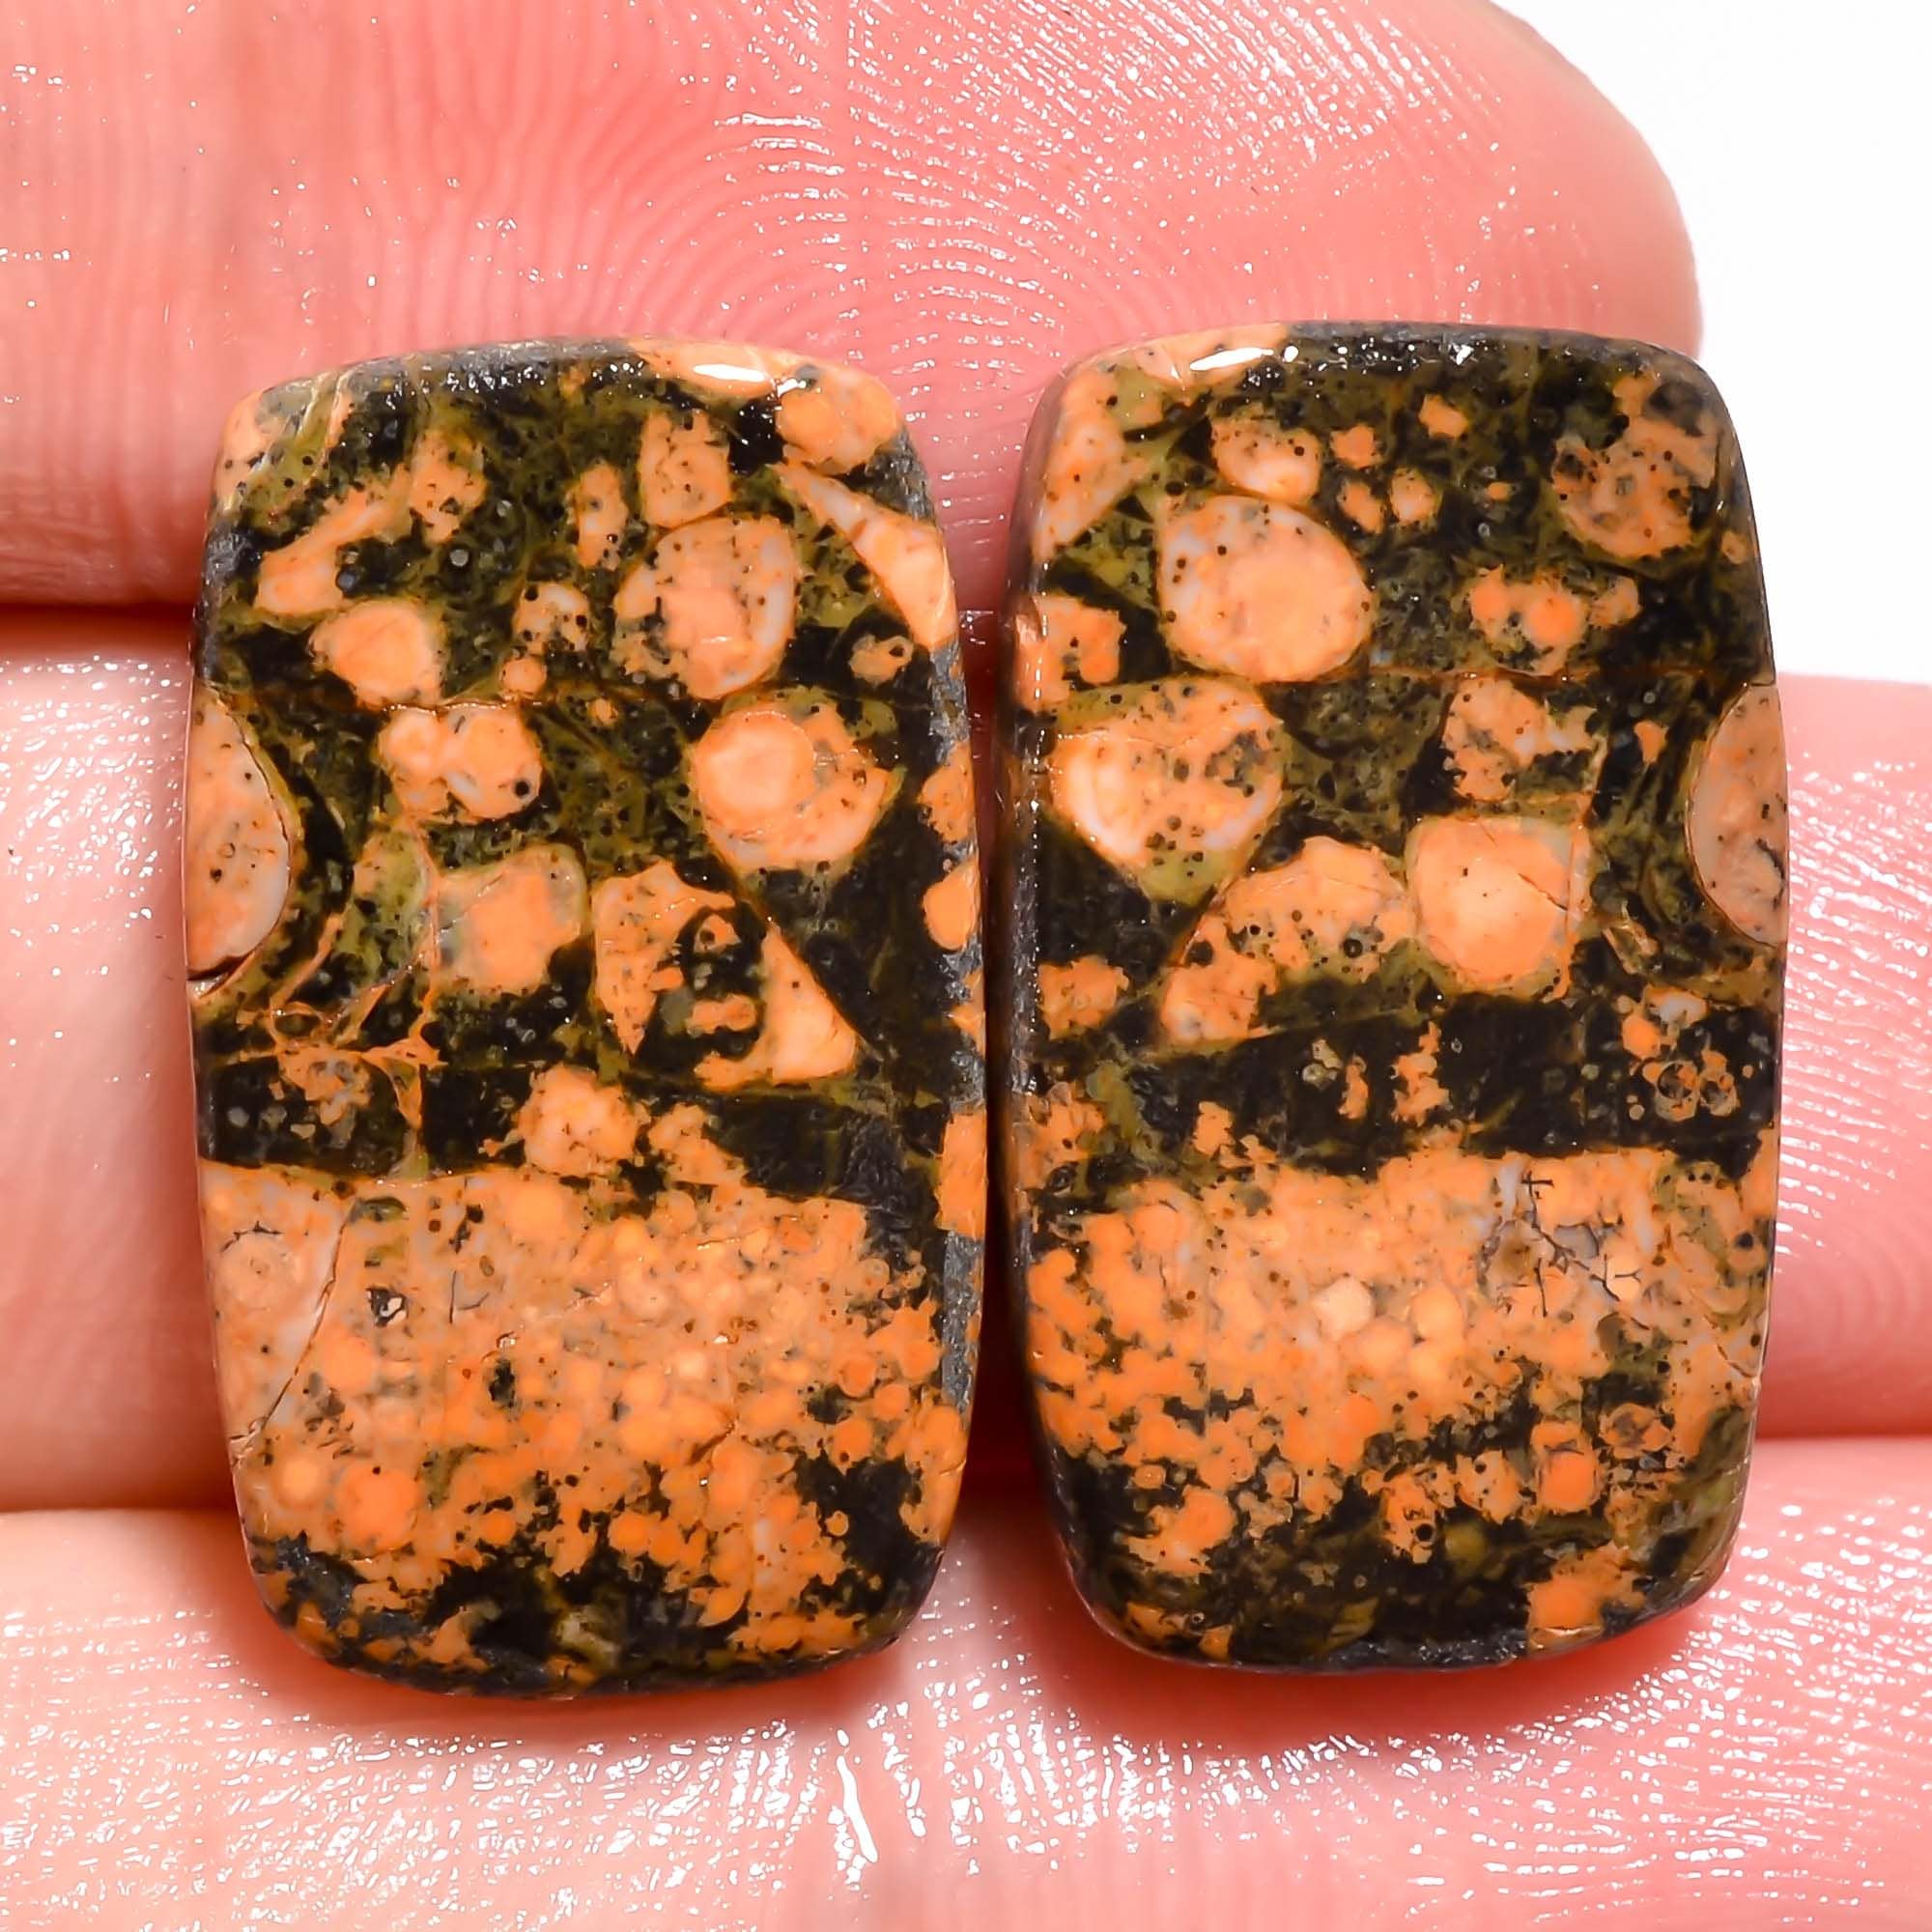 Fabulous A One Quality 100% Natural Star Galaxy Jasper Oval Shape Cabochon Loose Gemstone Pair For Making Earrings 36.5 Ct 29X16 mm Z-878